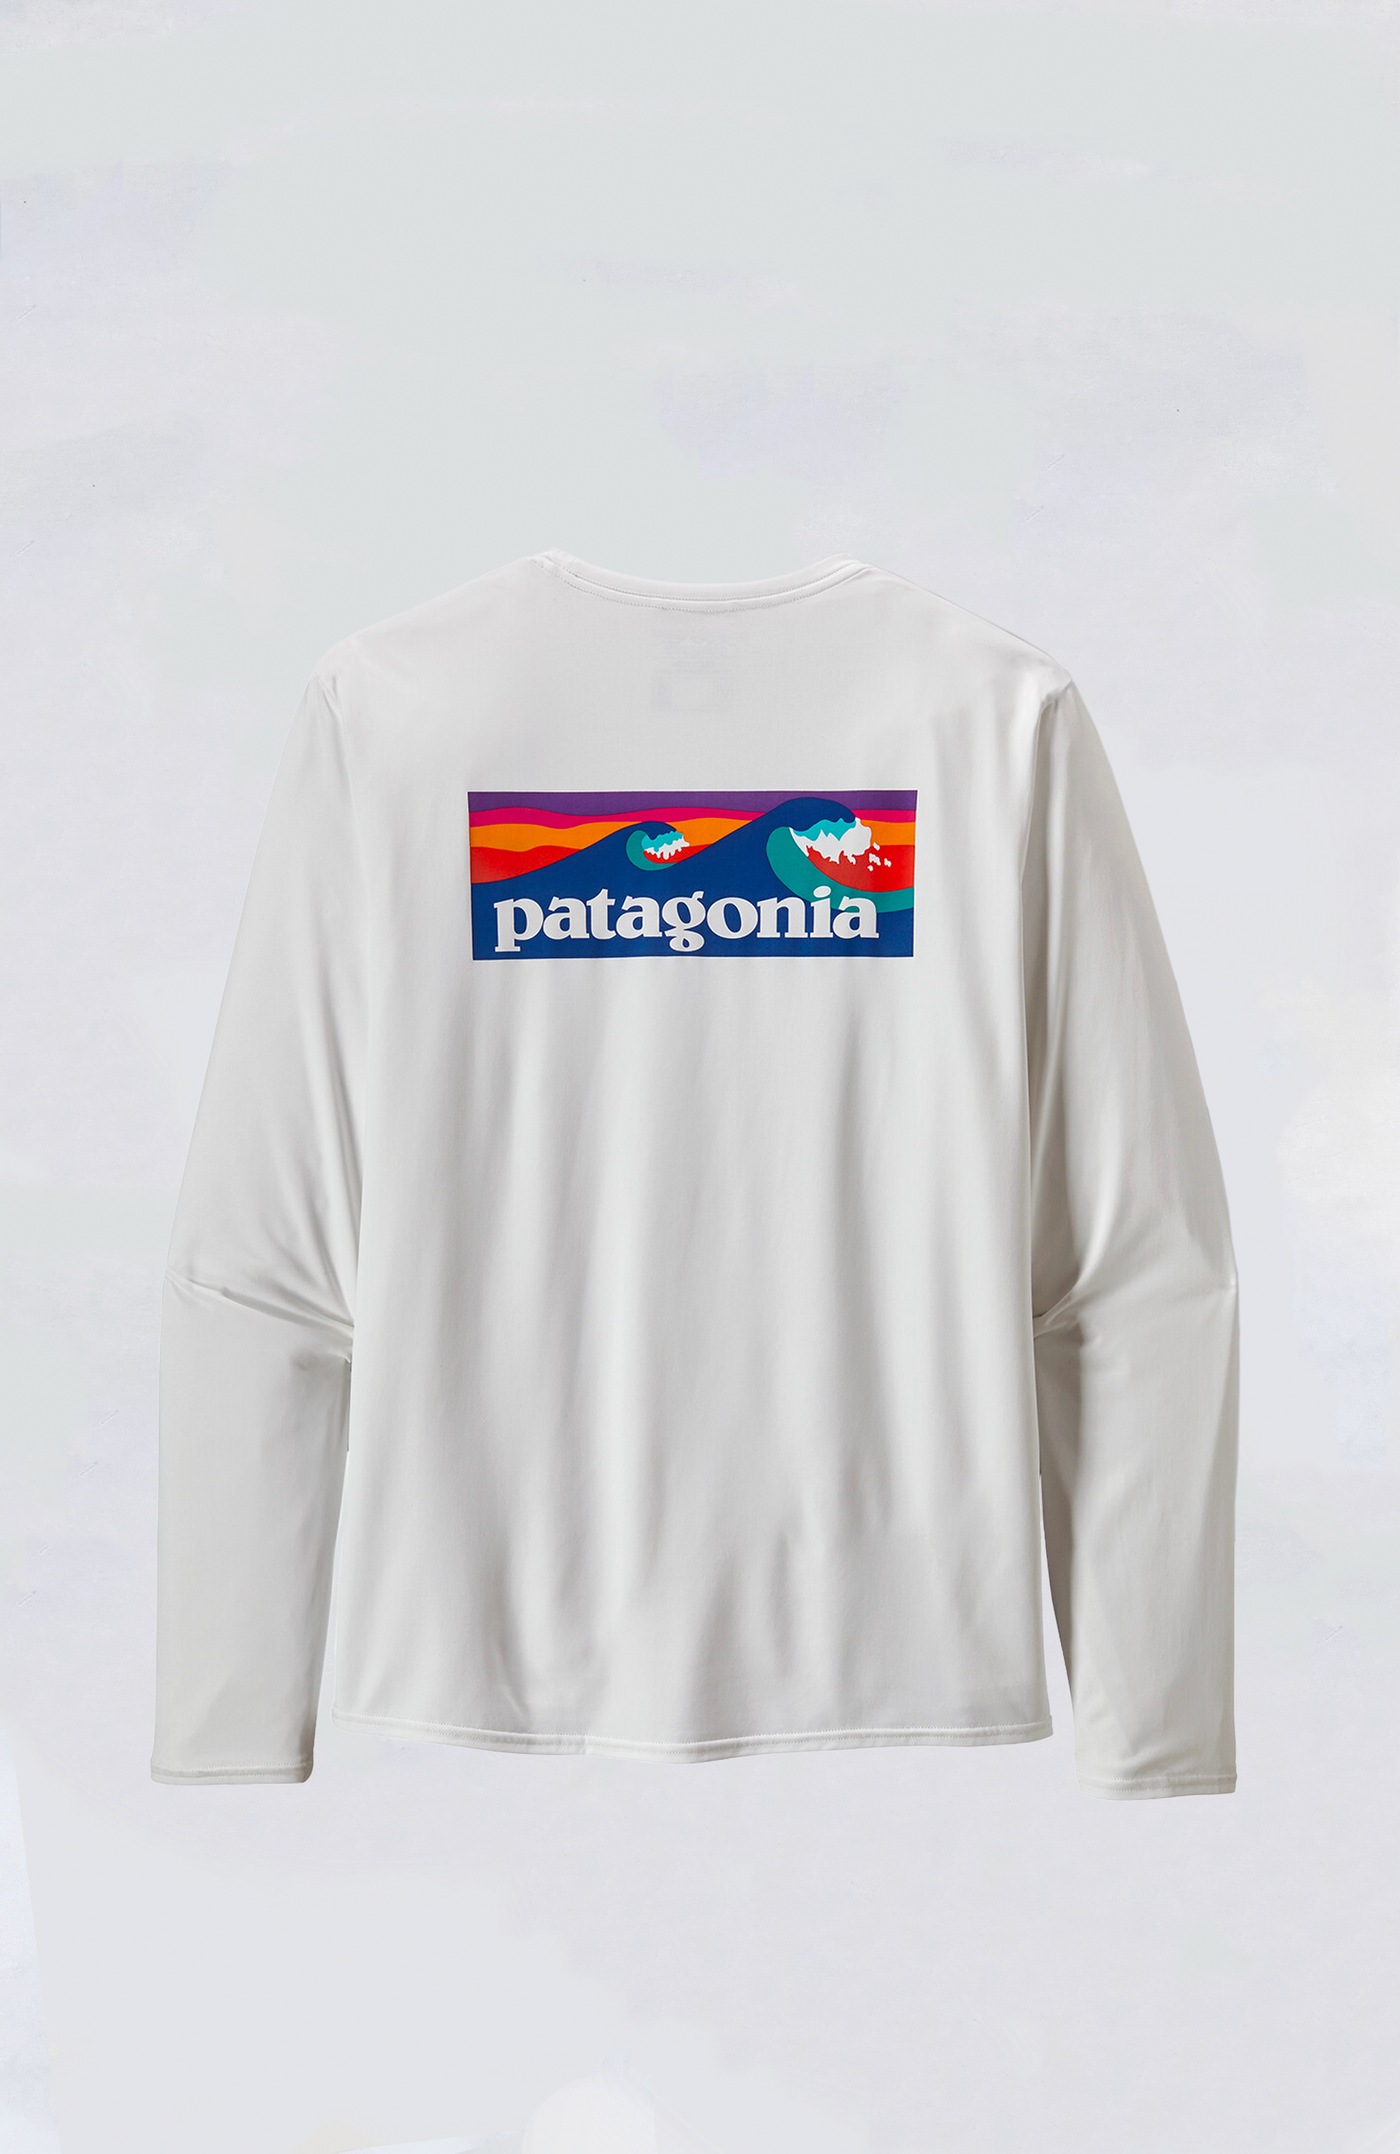 Patagonia Long Sleeve Tee - M's L/S Cap Cool Daily Graphic Shirt - Waters